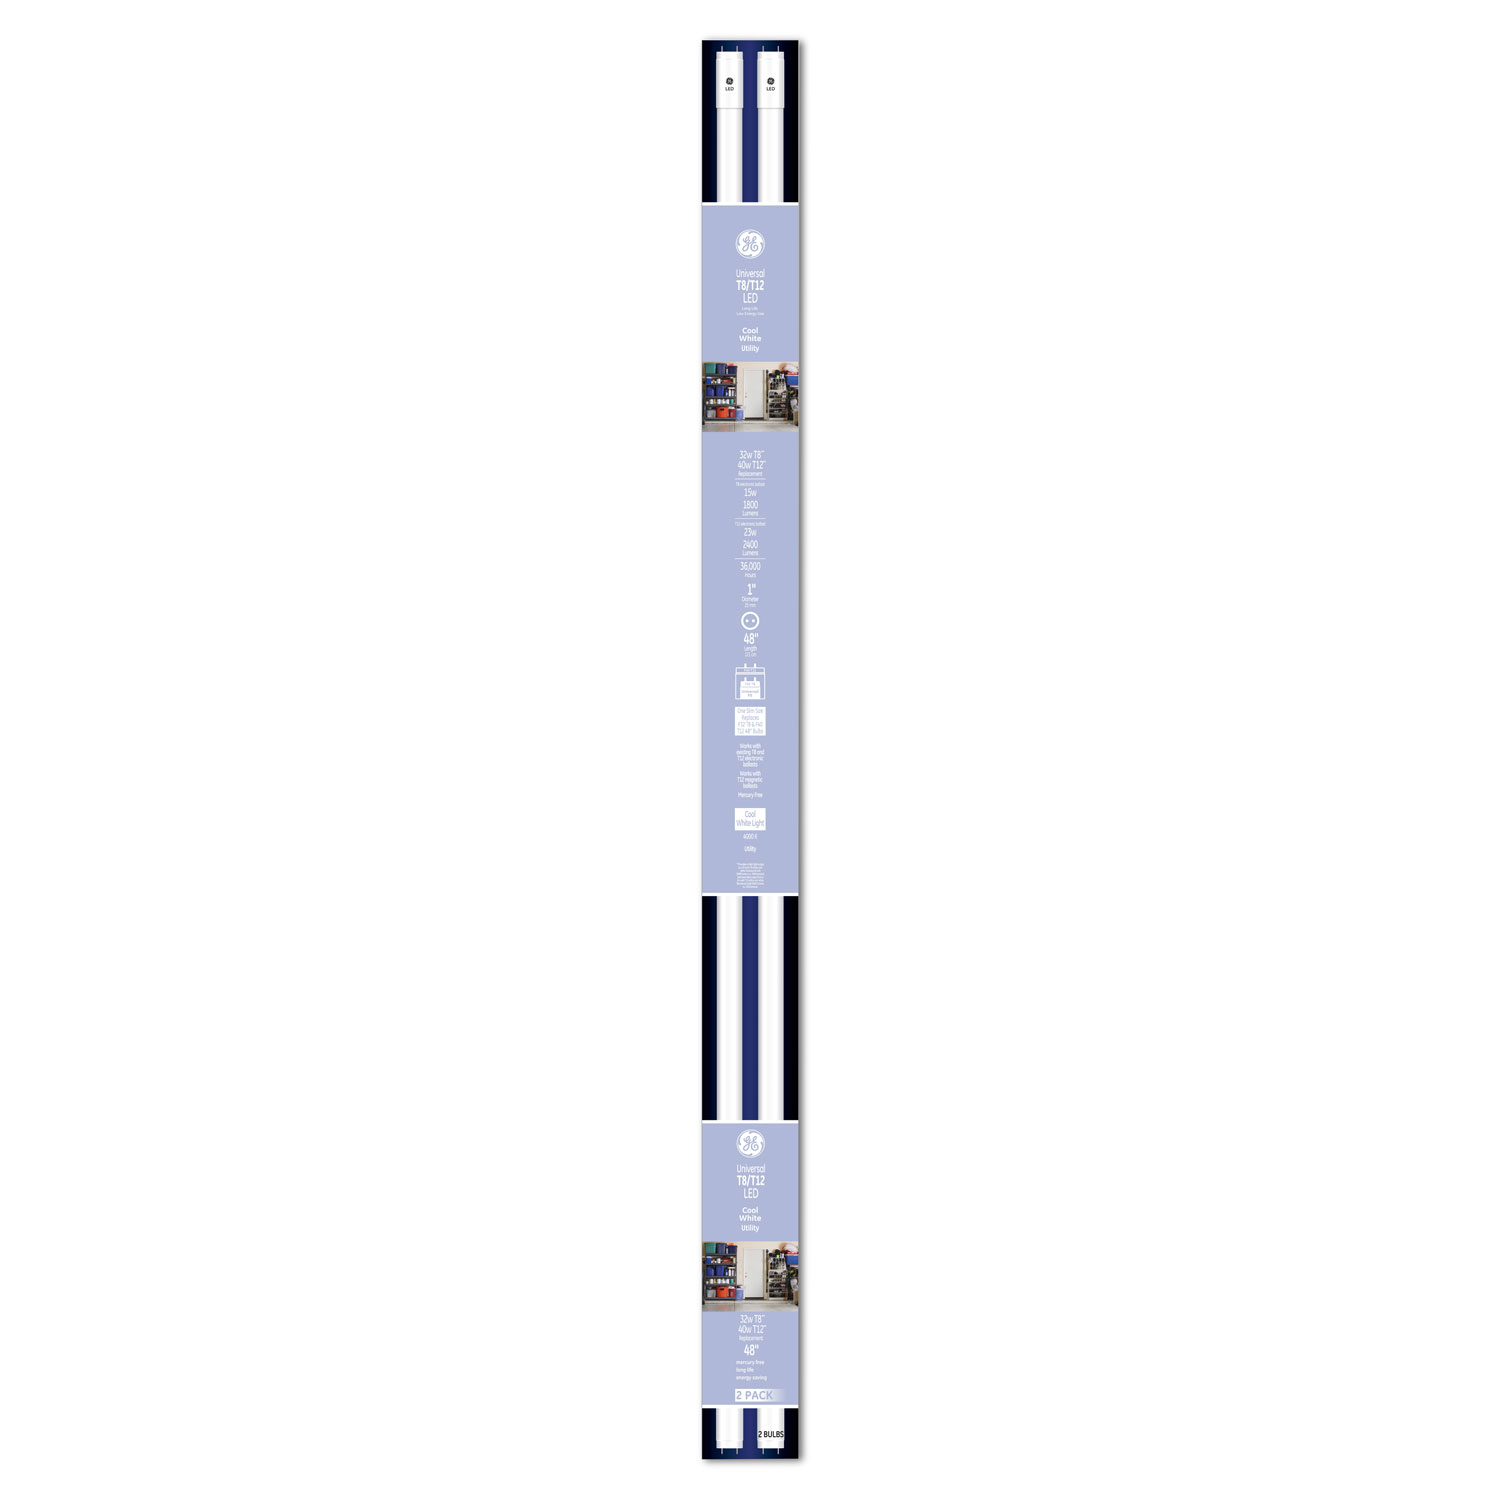 Fluorescent Tubes - 48 T8, Cool White